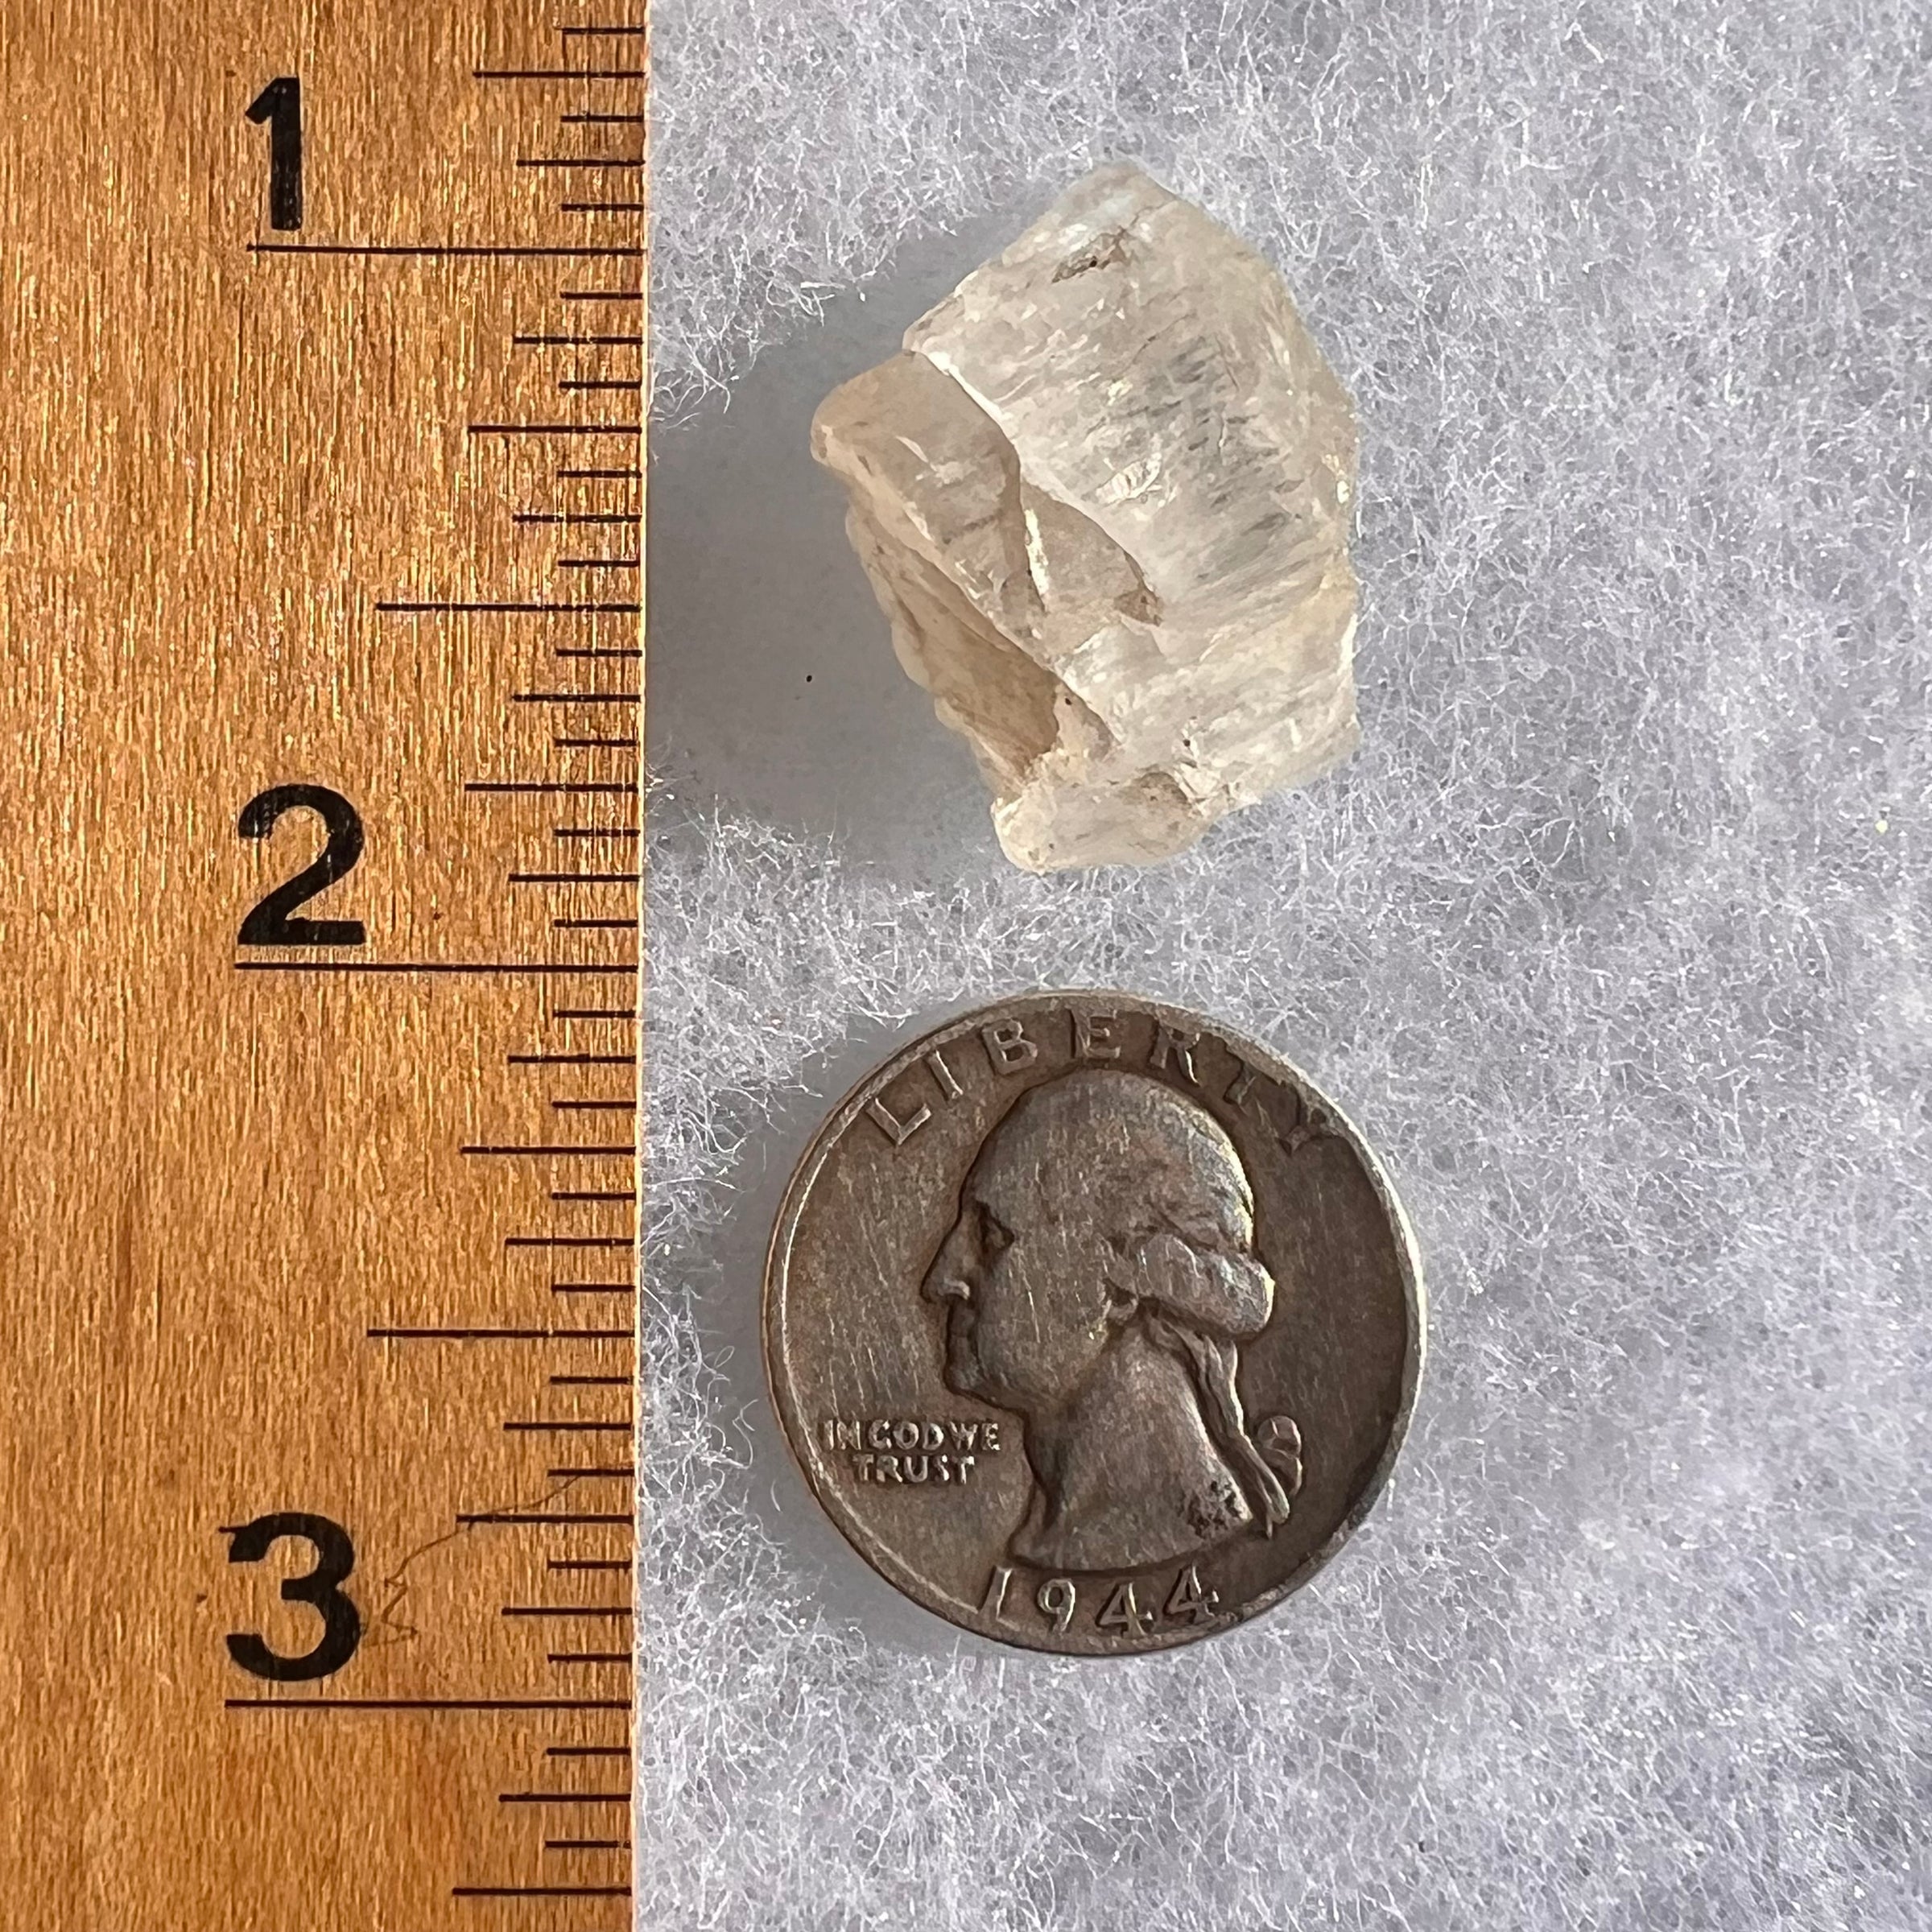 Petalite Crystal "Stone of the Angels" #22